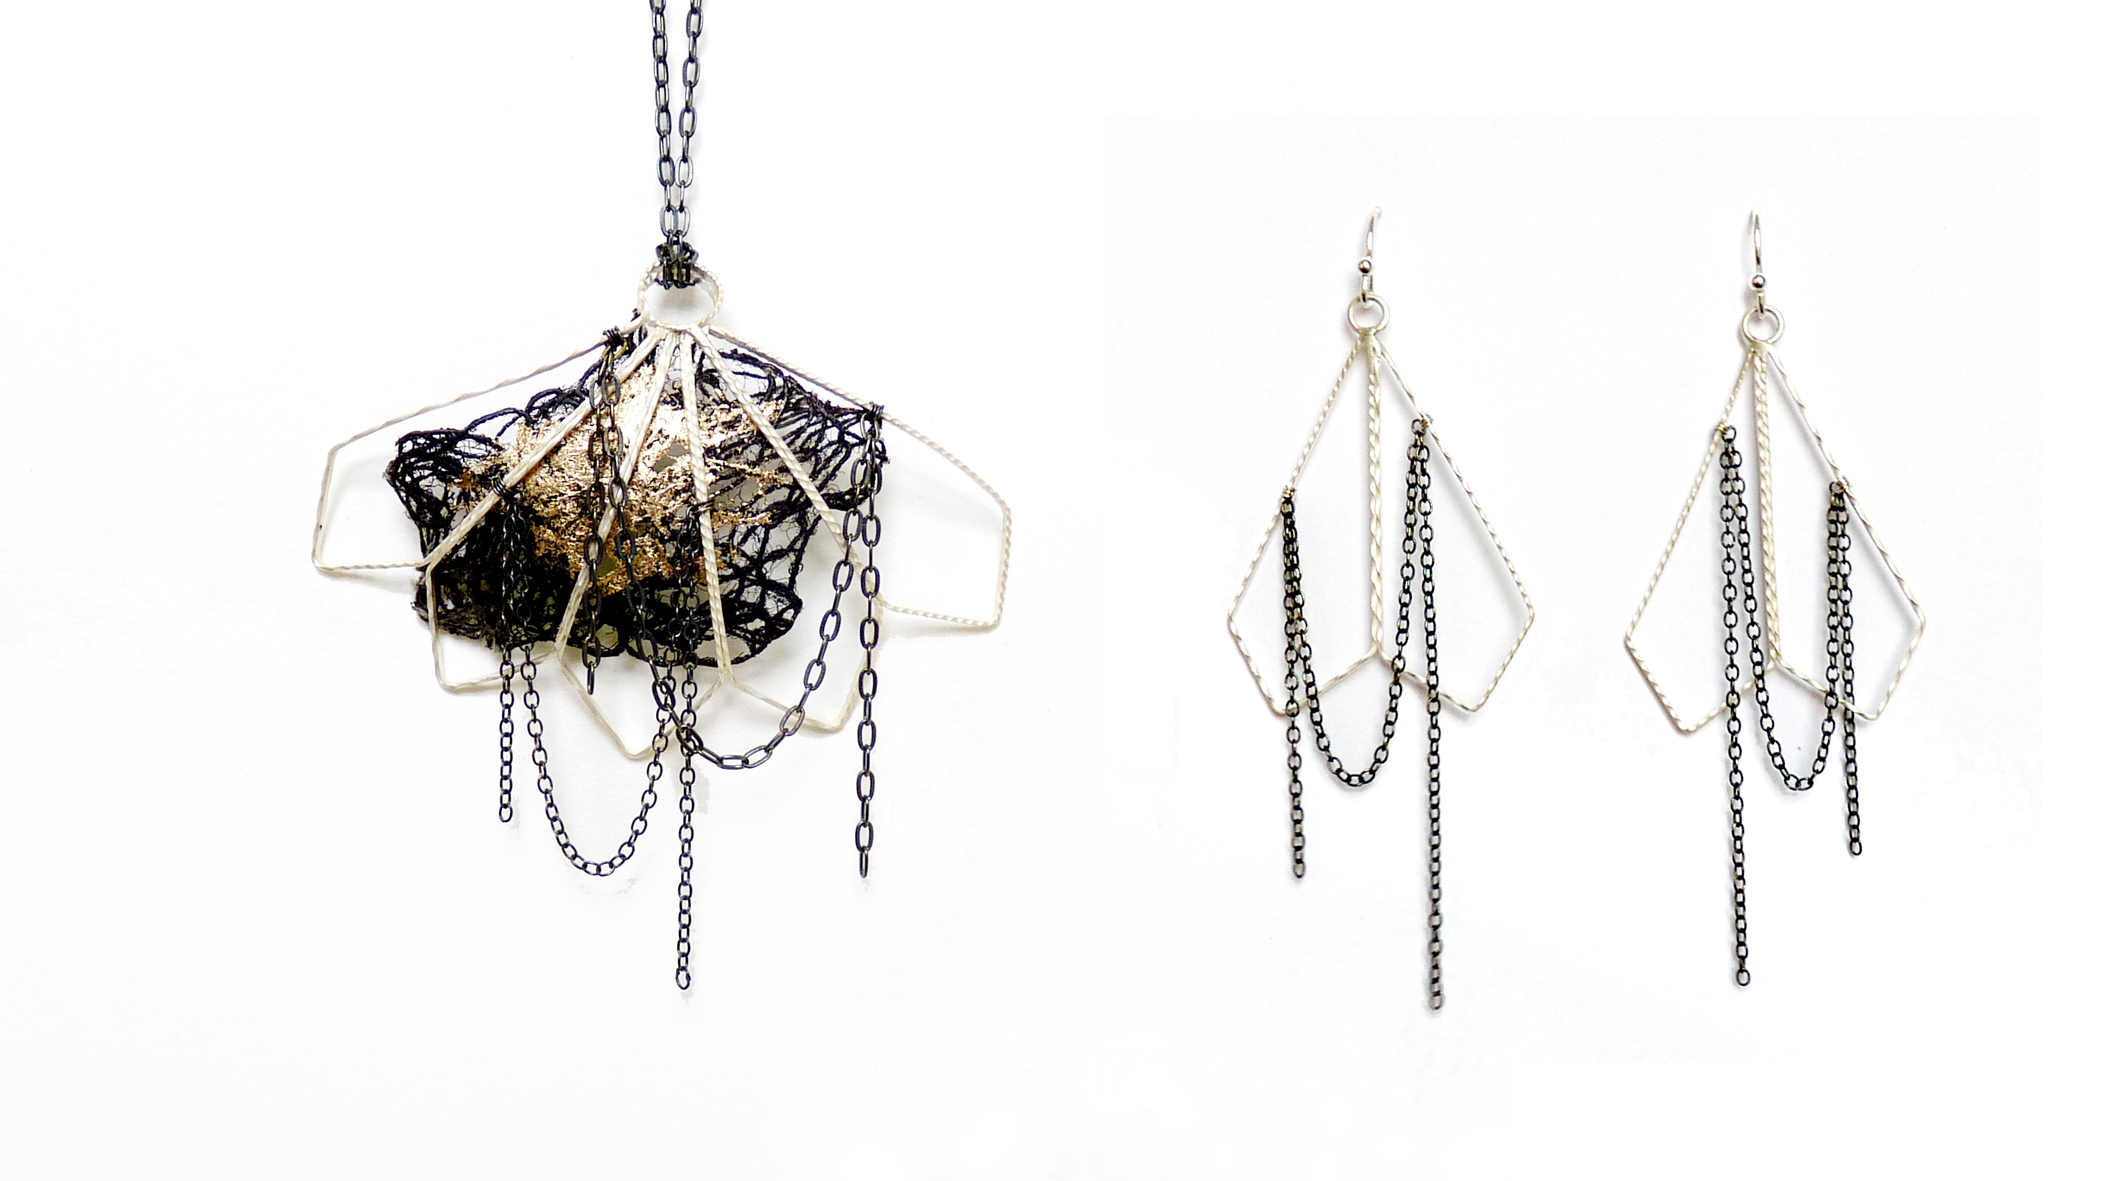  Diamond Fan Pendant and Earrings -  silver, copper coated textile, gold leaf.&nbsp;2012  